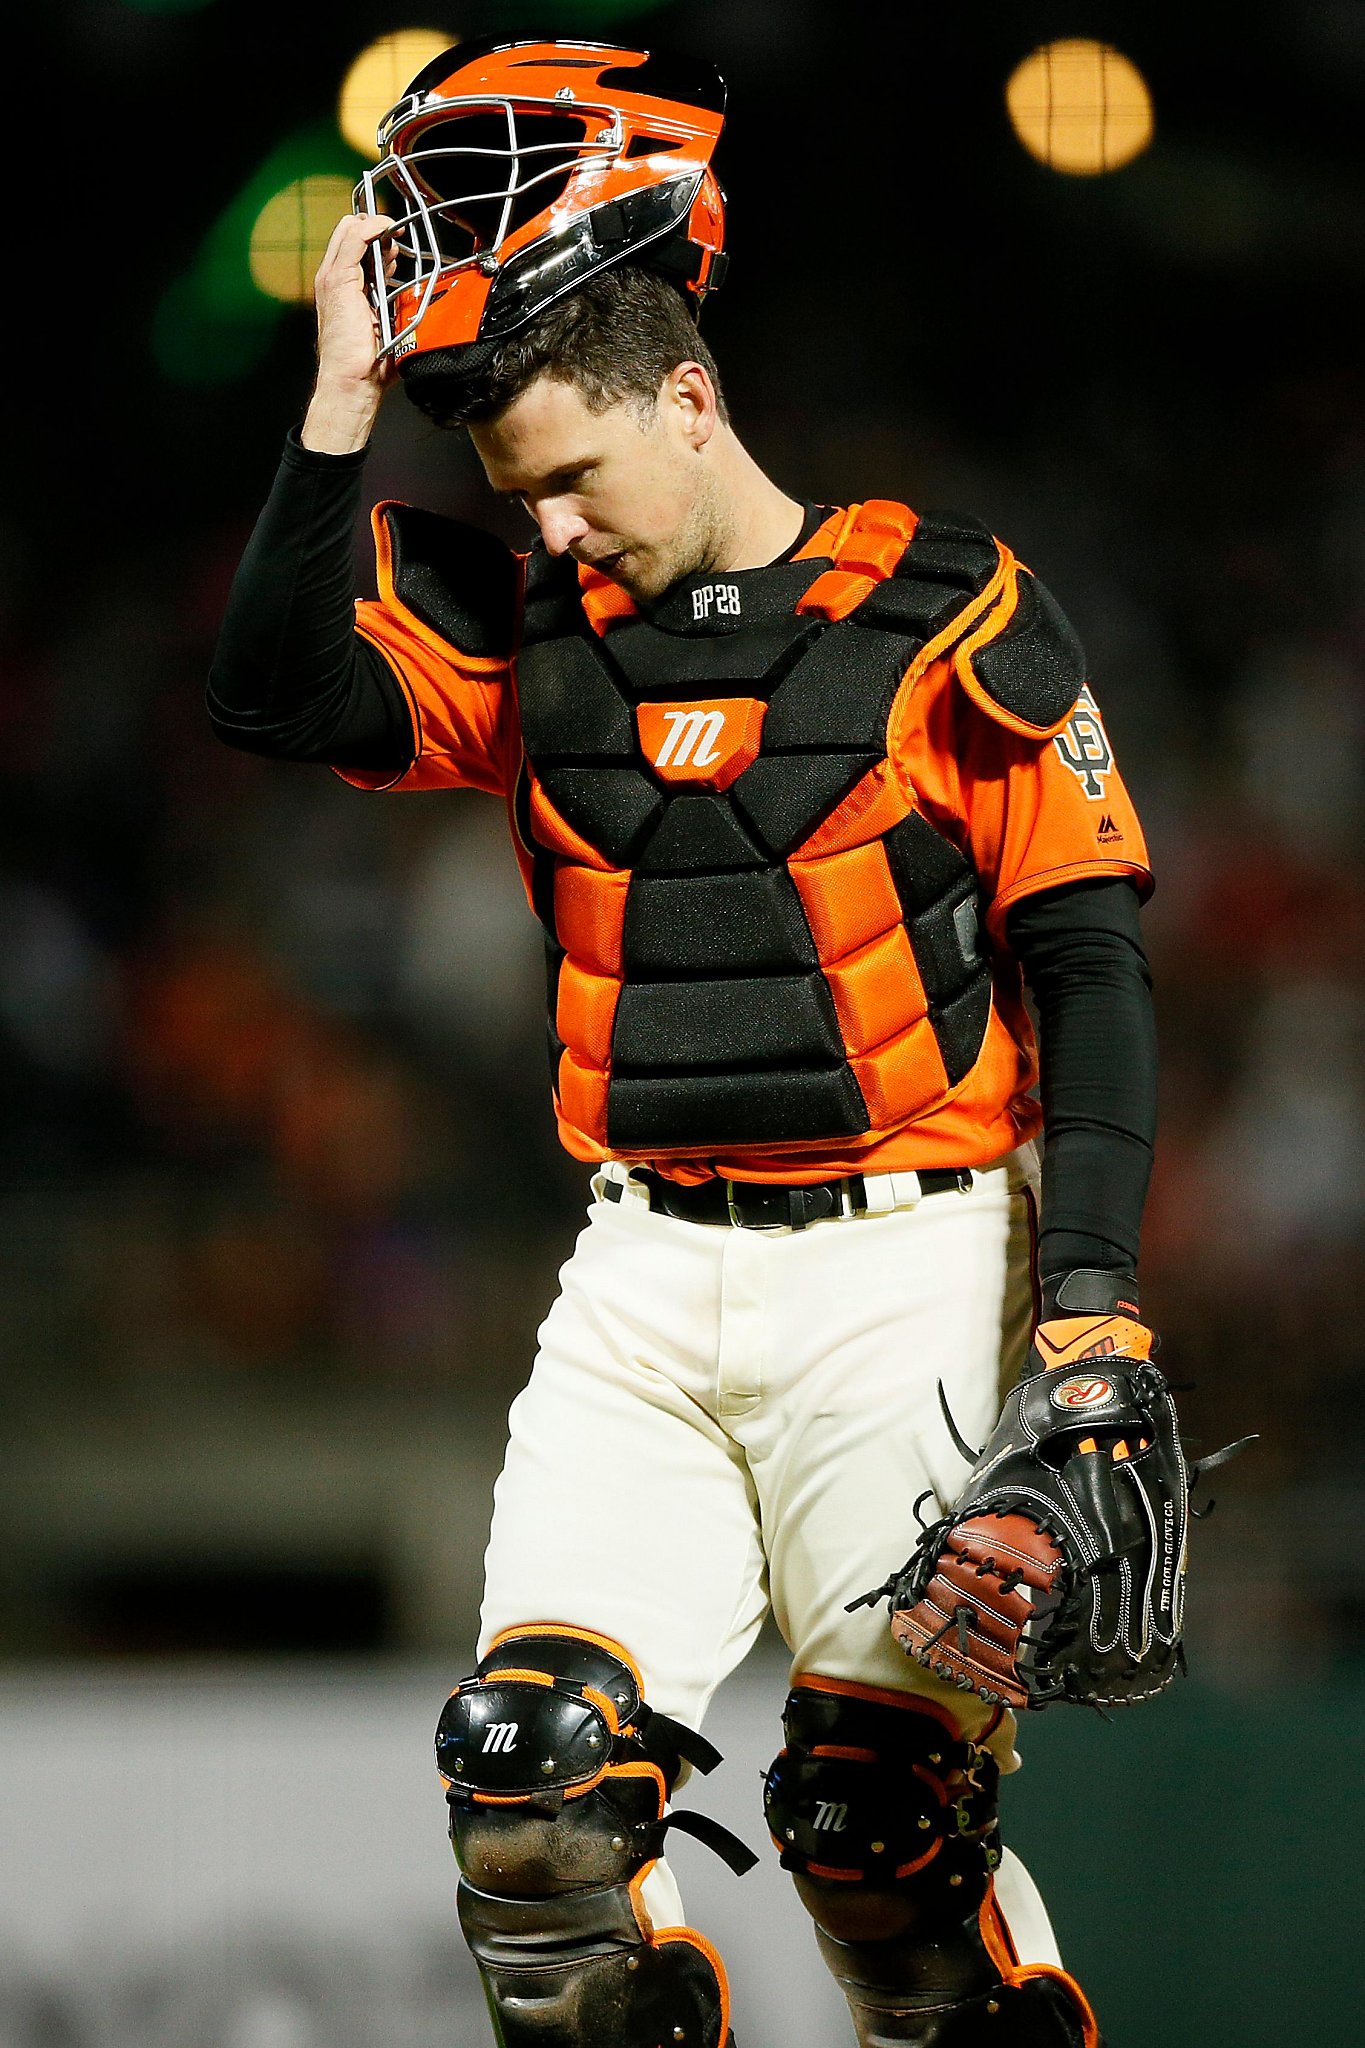 Buster Posey uncorked a literal perfect throw last night, and